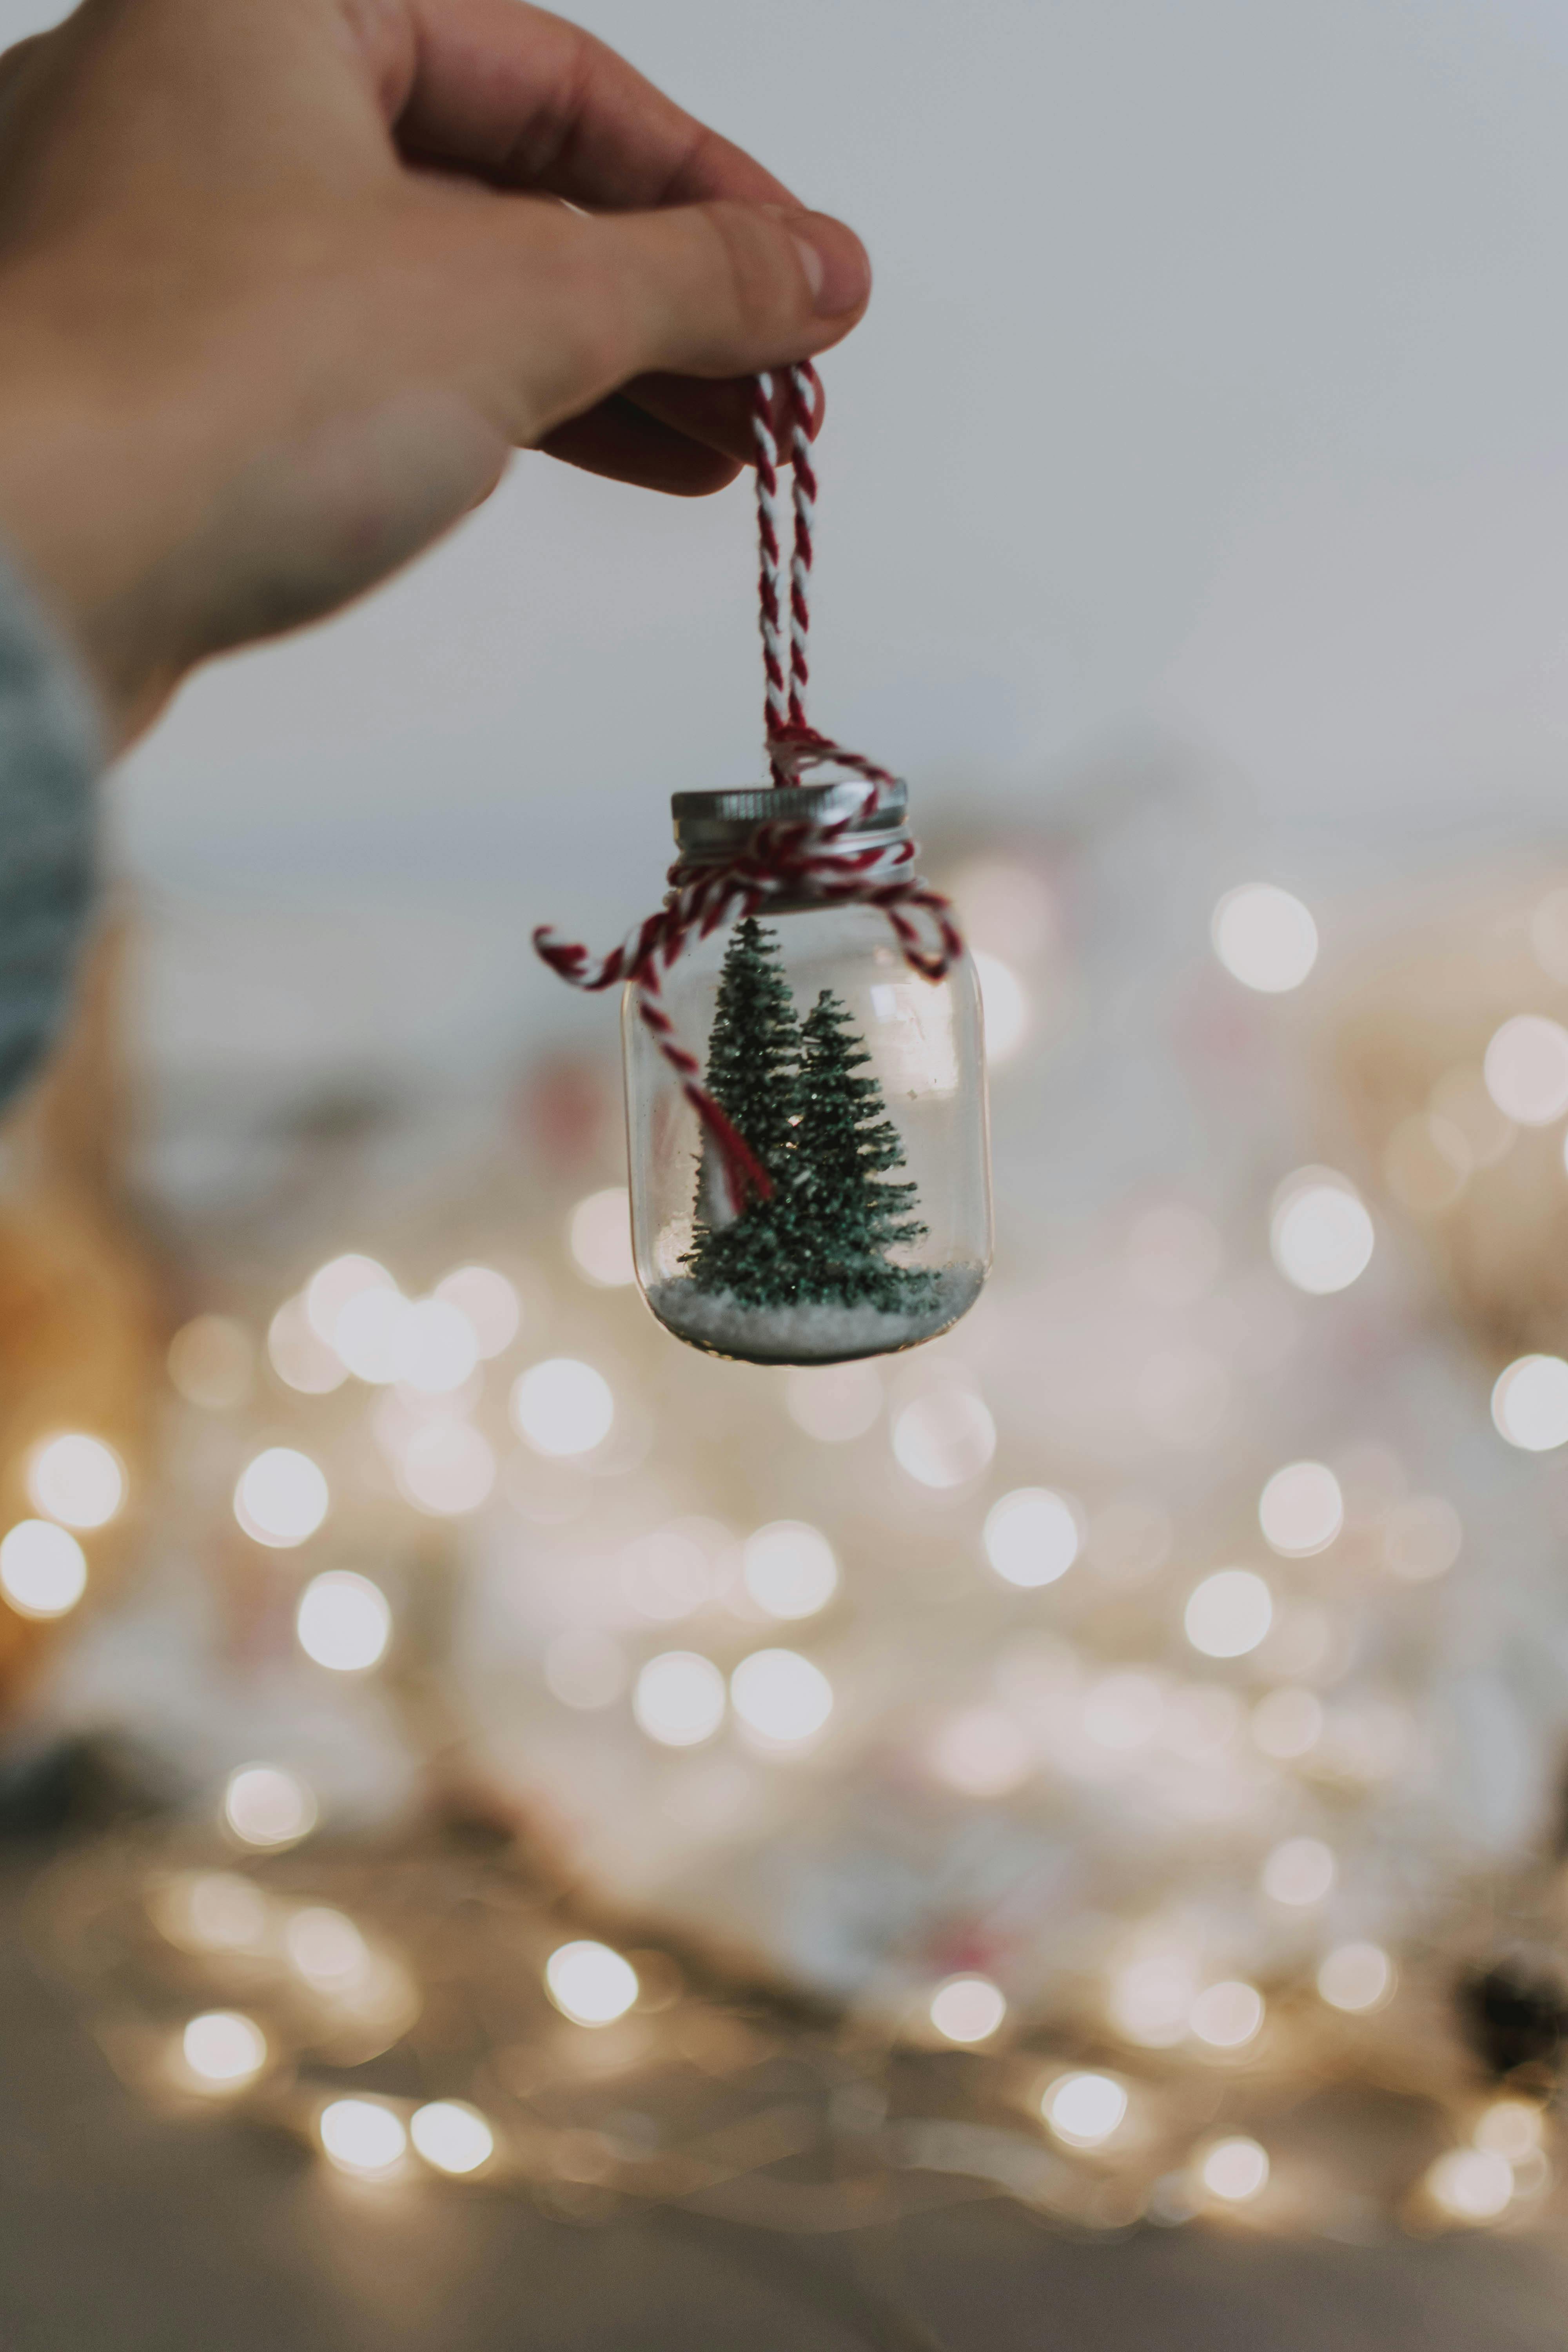 shallow focus photo of person s hand holding miniature pine trees in a glass jar